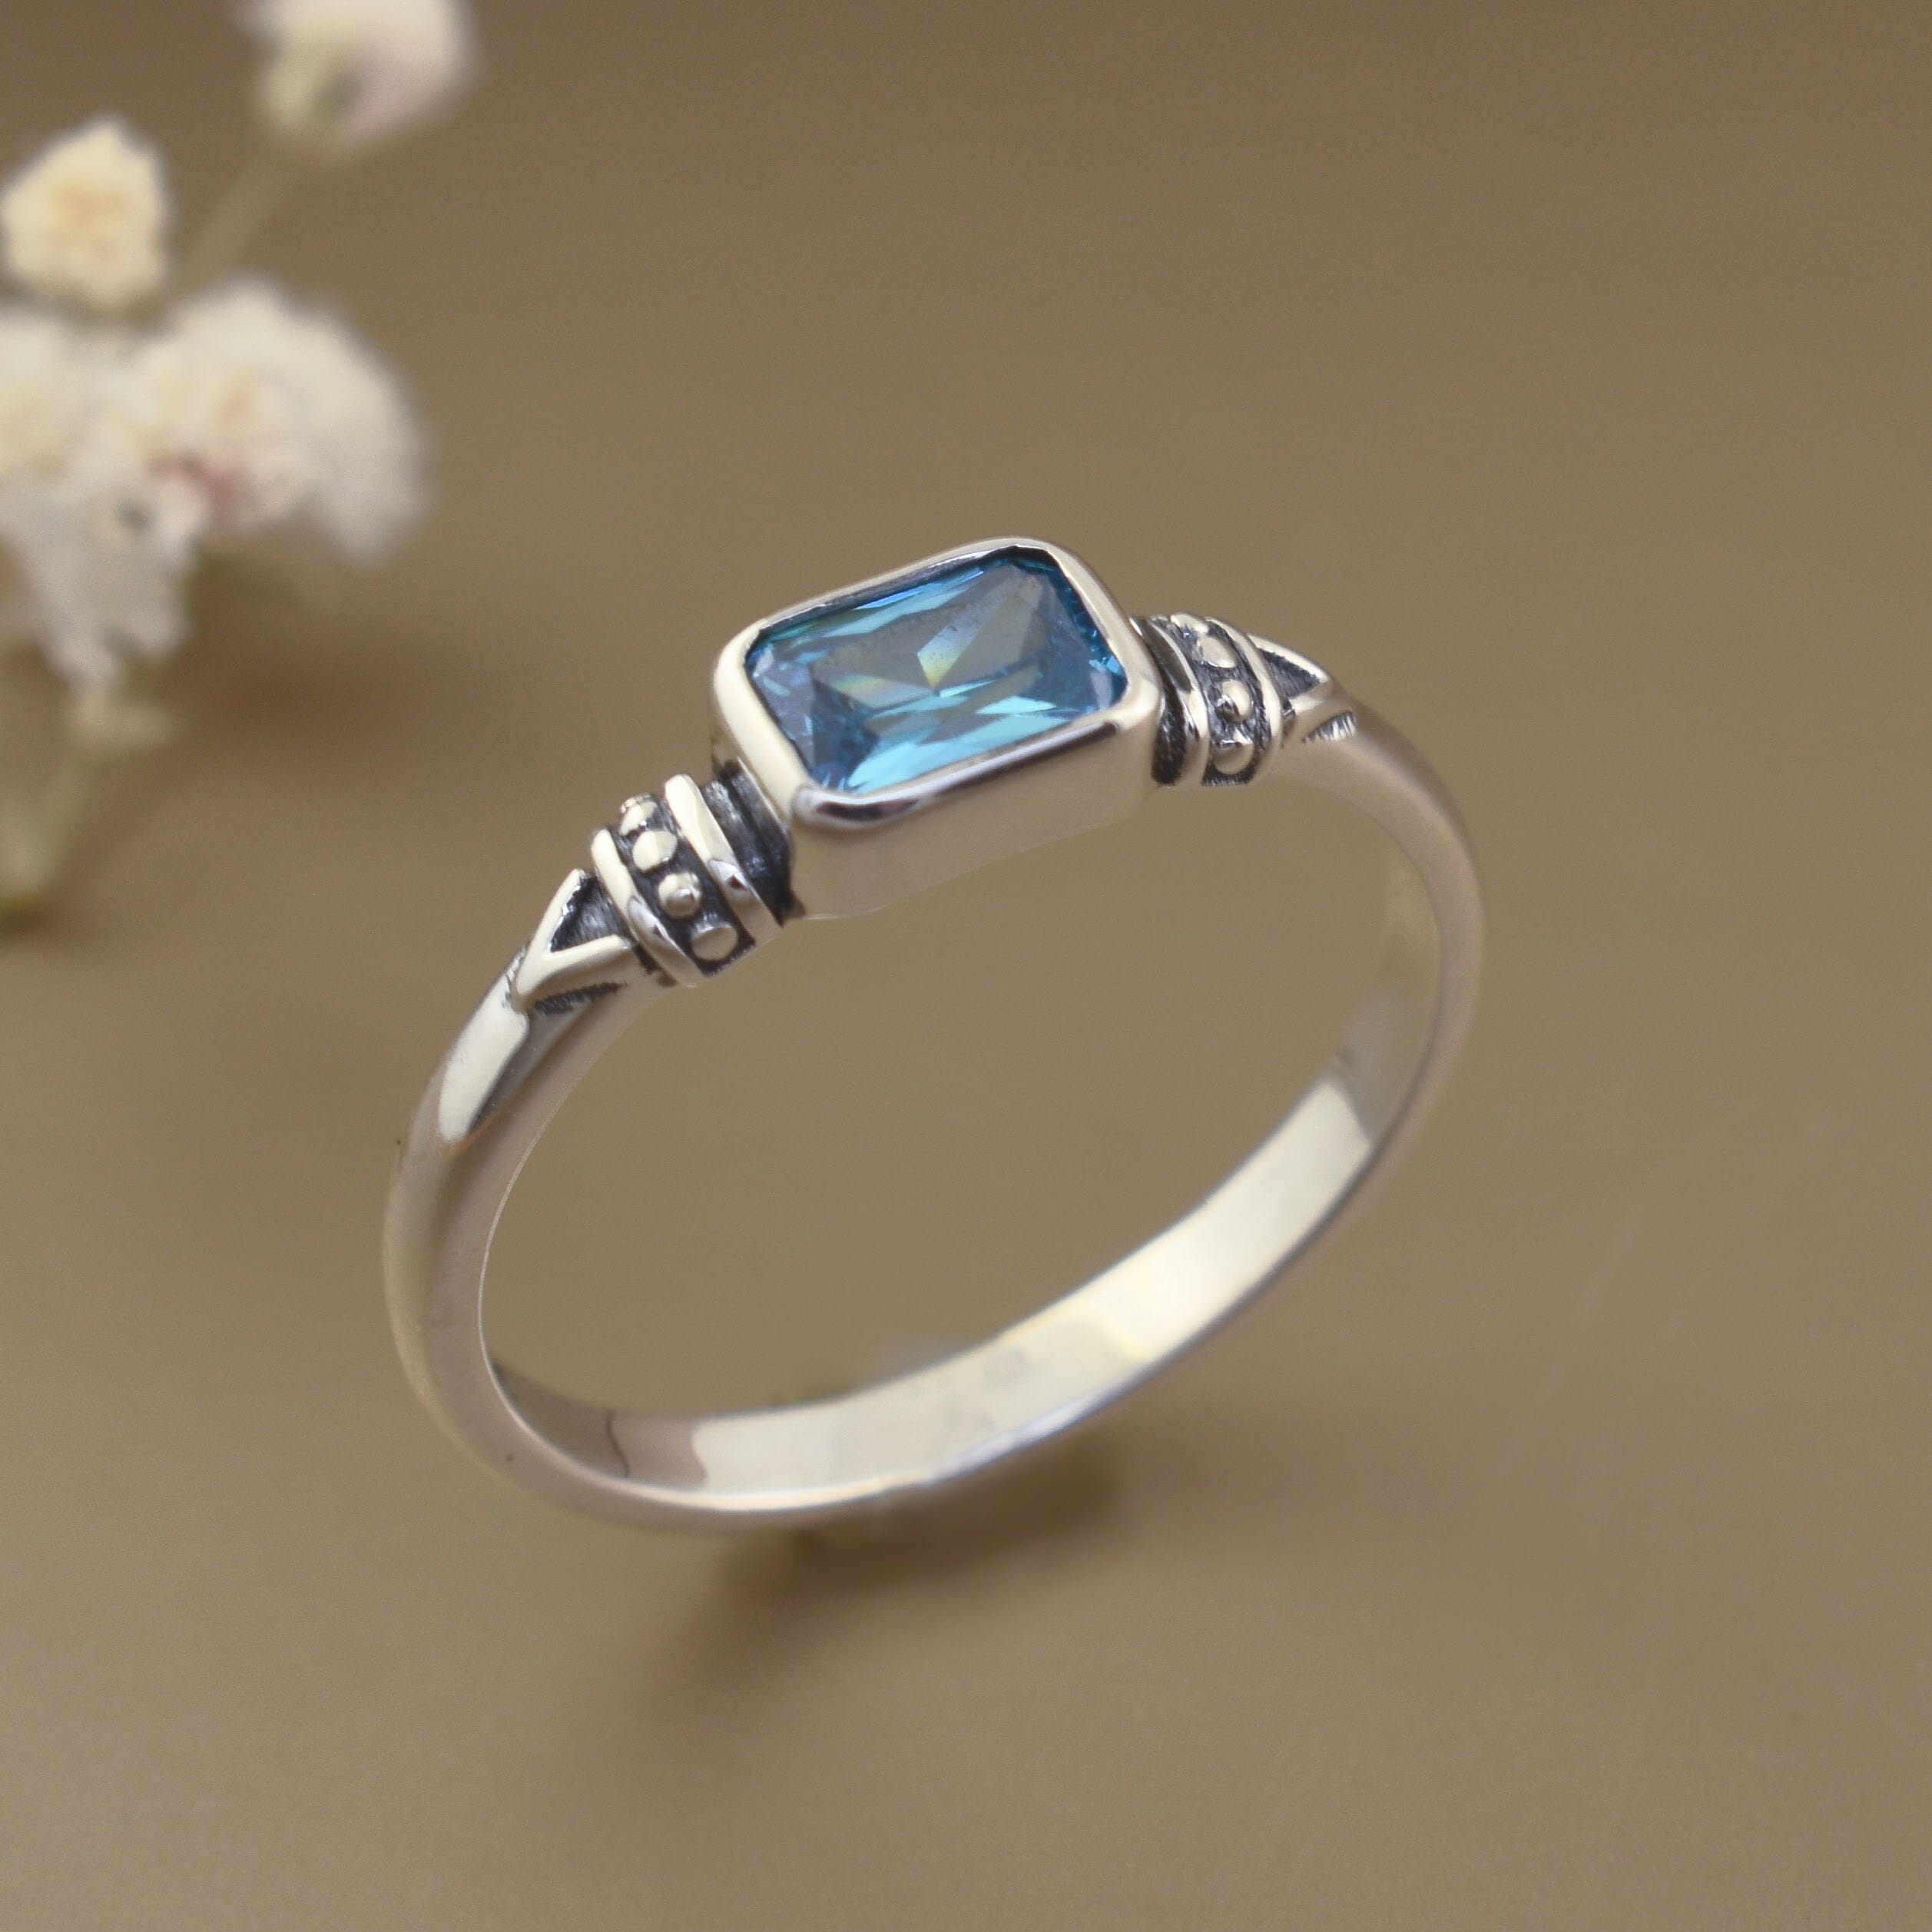 Handcrafted sterling silver ring with blue stone sparkle